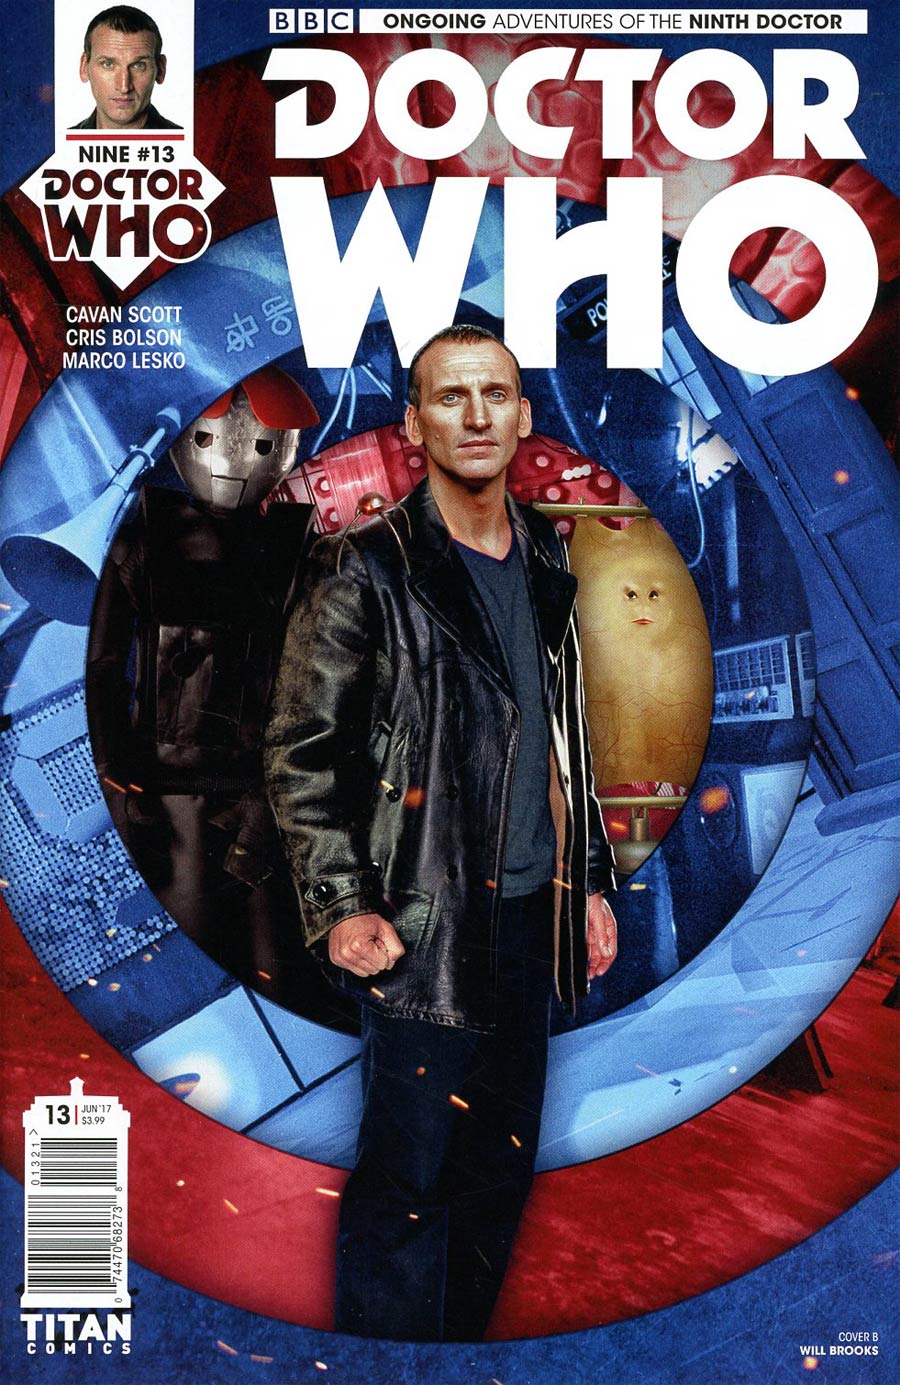 Doctor Who 9th Doctor Vol 2 #13 Cover B Variant Photo Cover